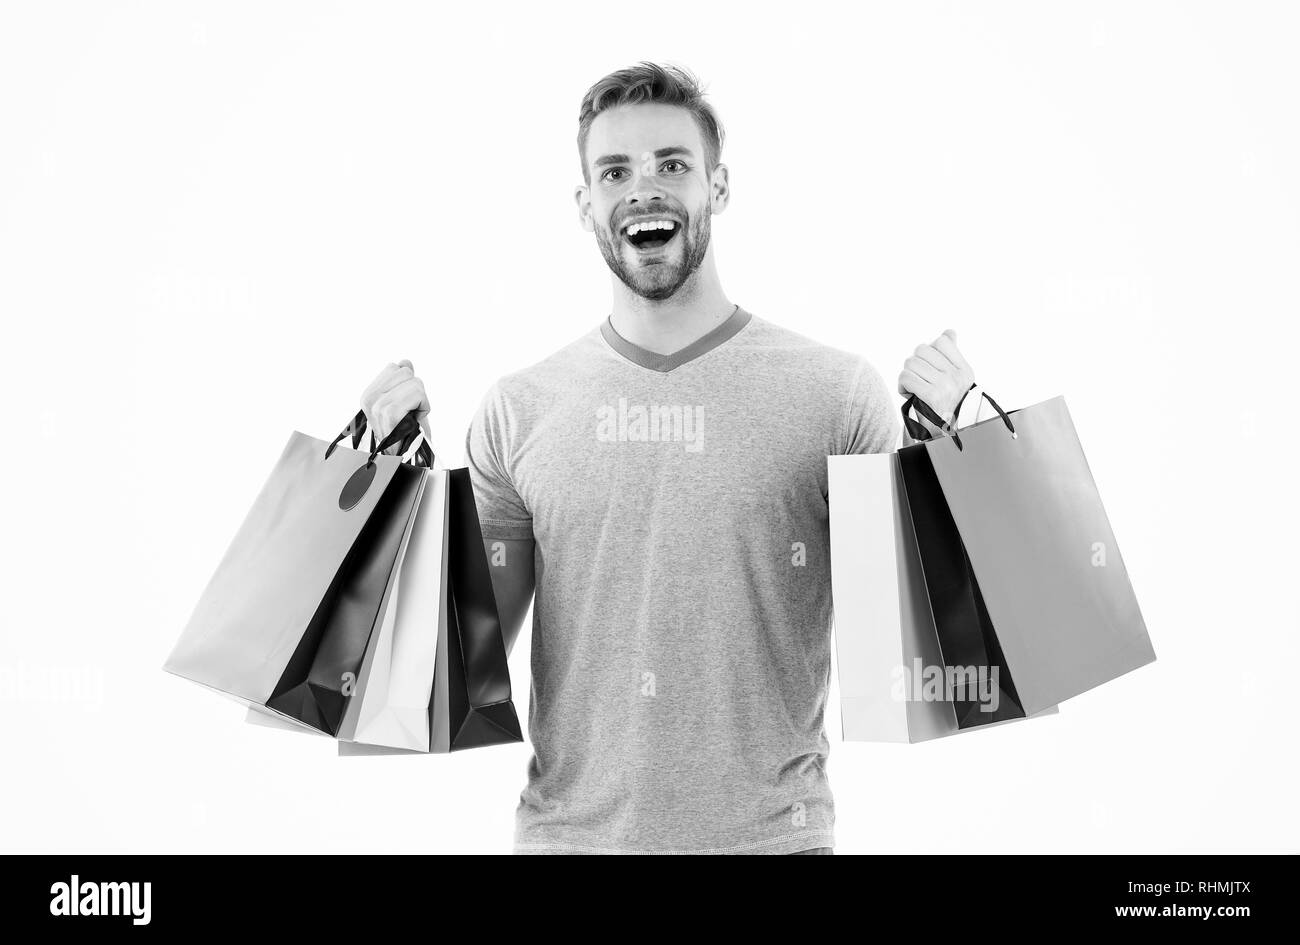 Positive man enjoying shopping. happy man with shopping bags isolated on white. Excited happy man doing online shopping. Thanks for your purchase. Quality service. Shopping happiness. Stock Photo